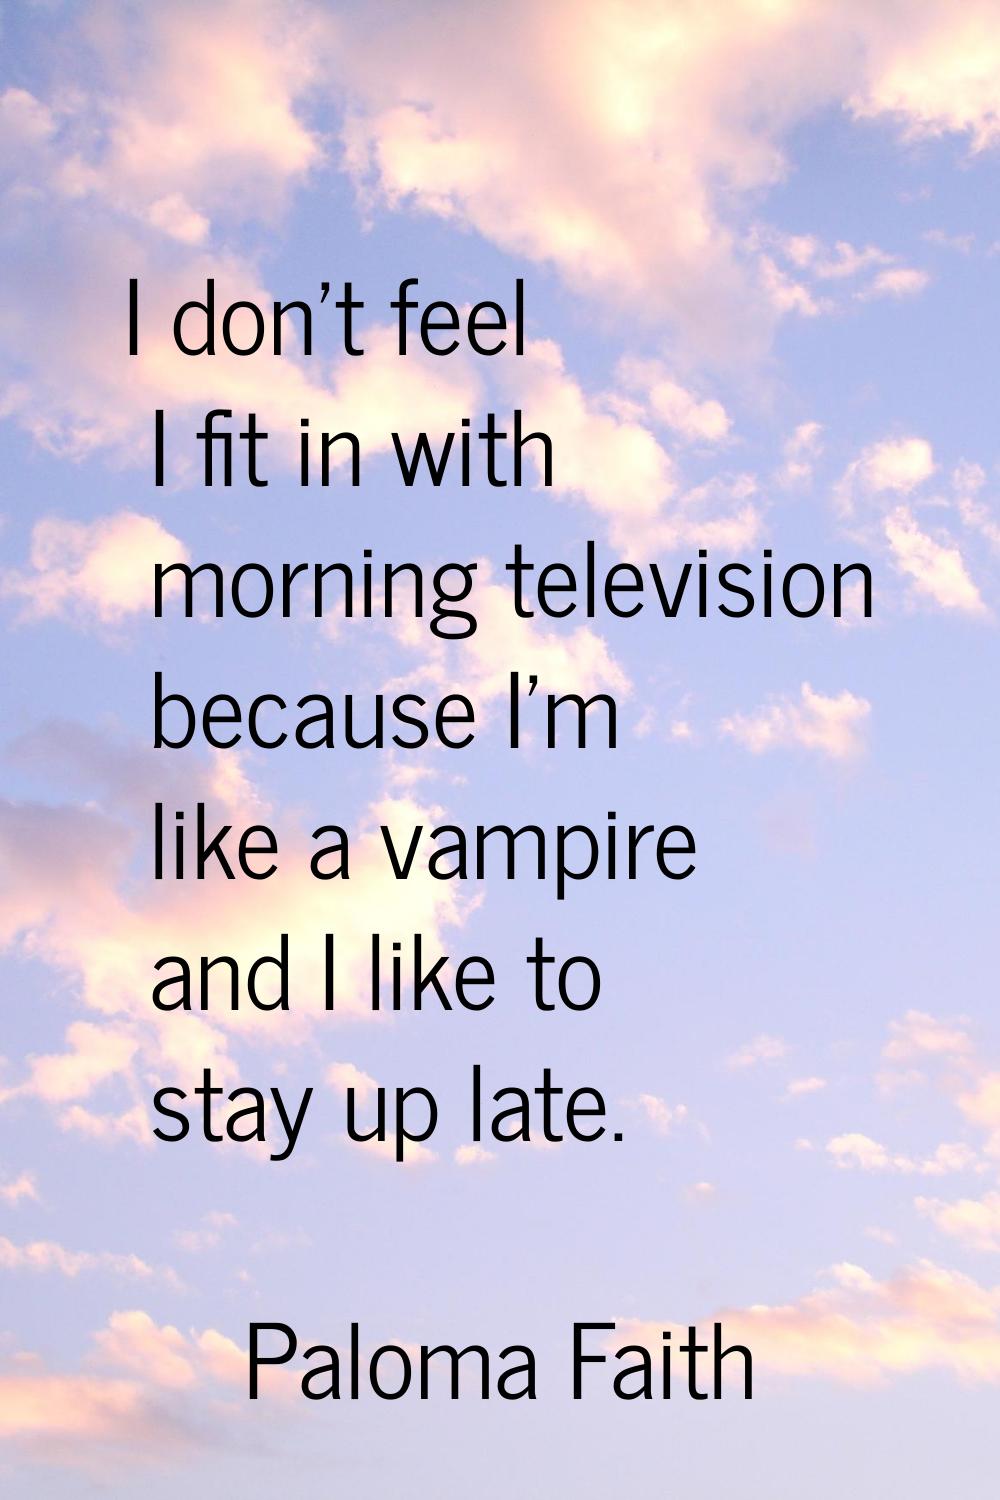 I don't feel I fit in with morning television because I'm like a vampire and I like to stay up late